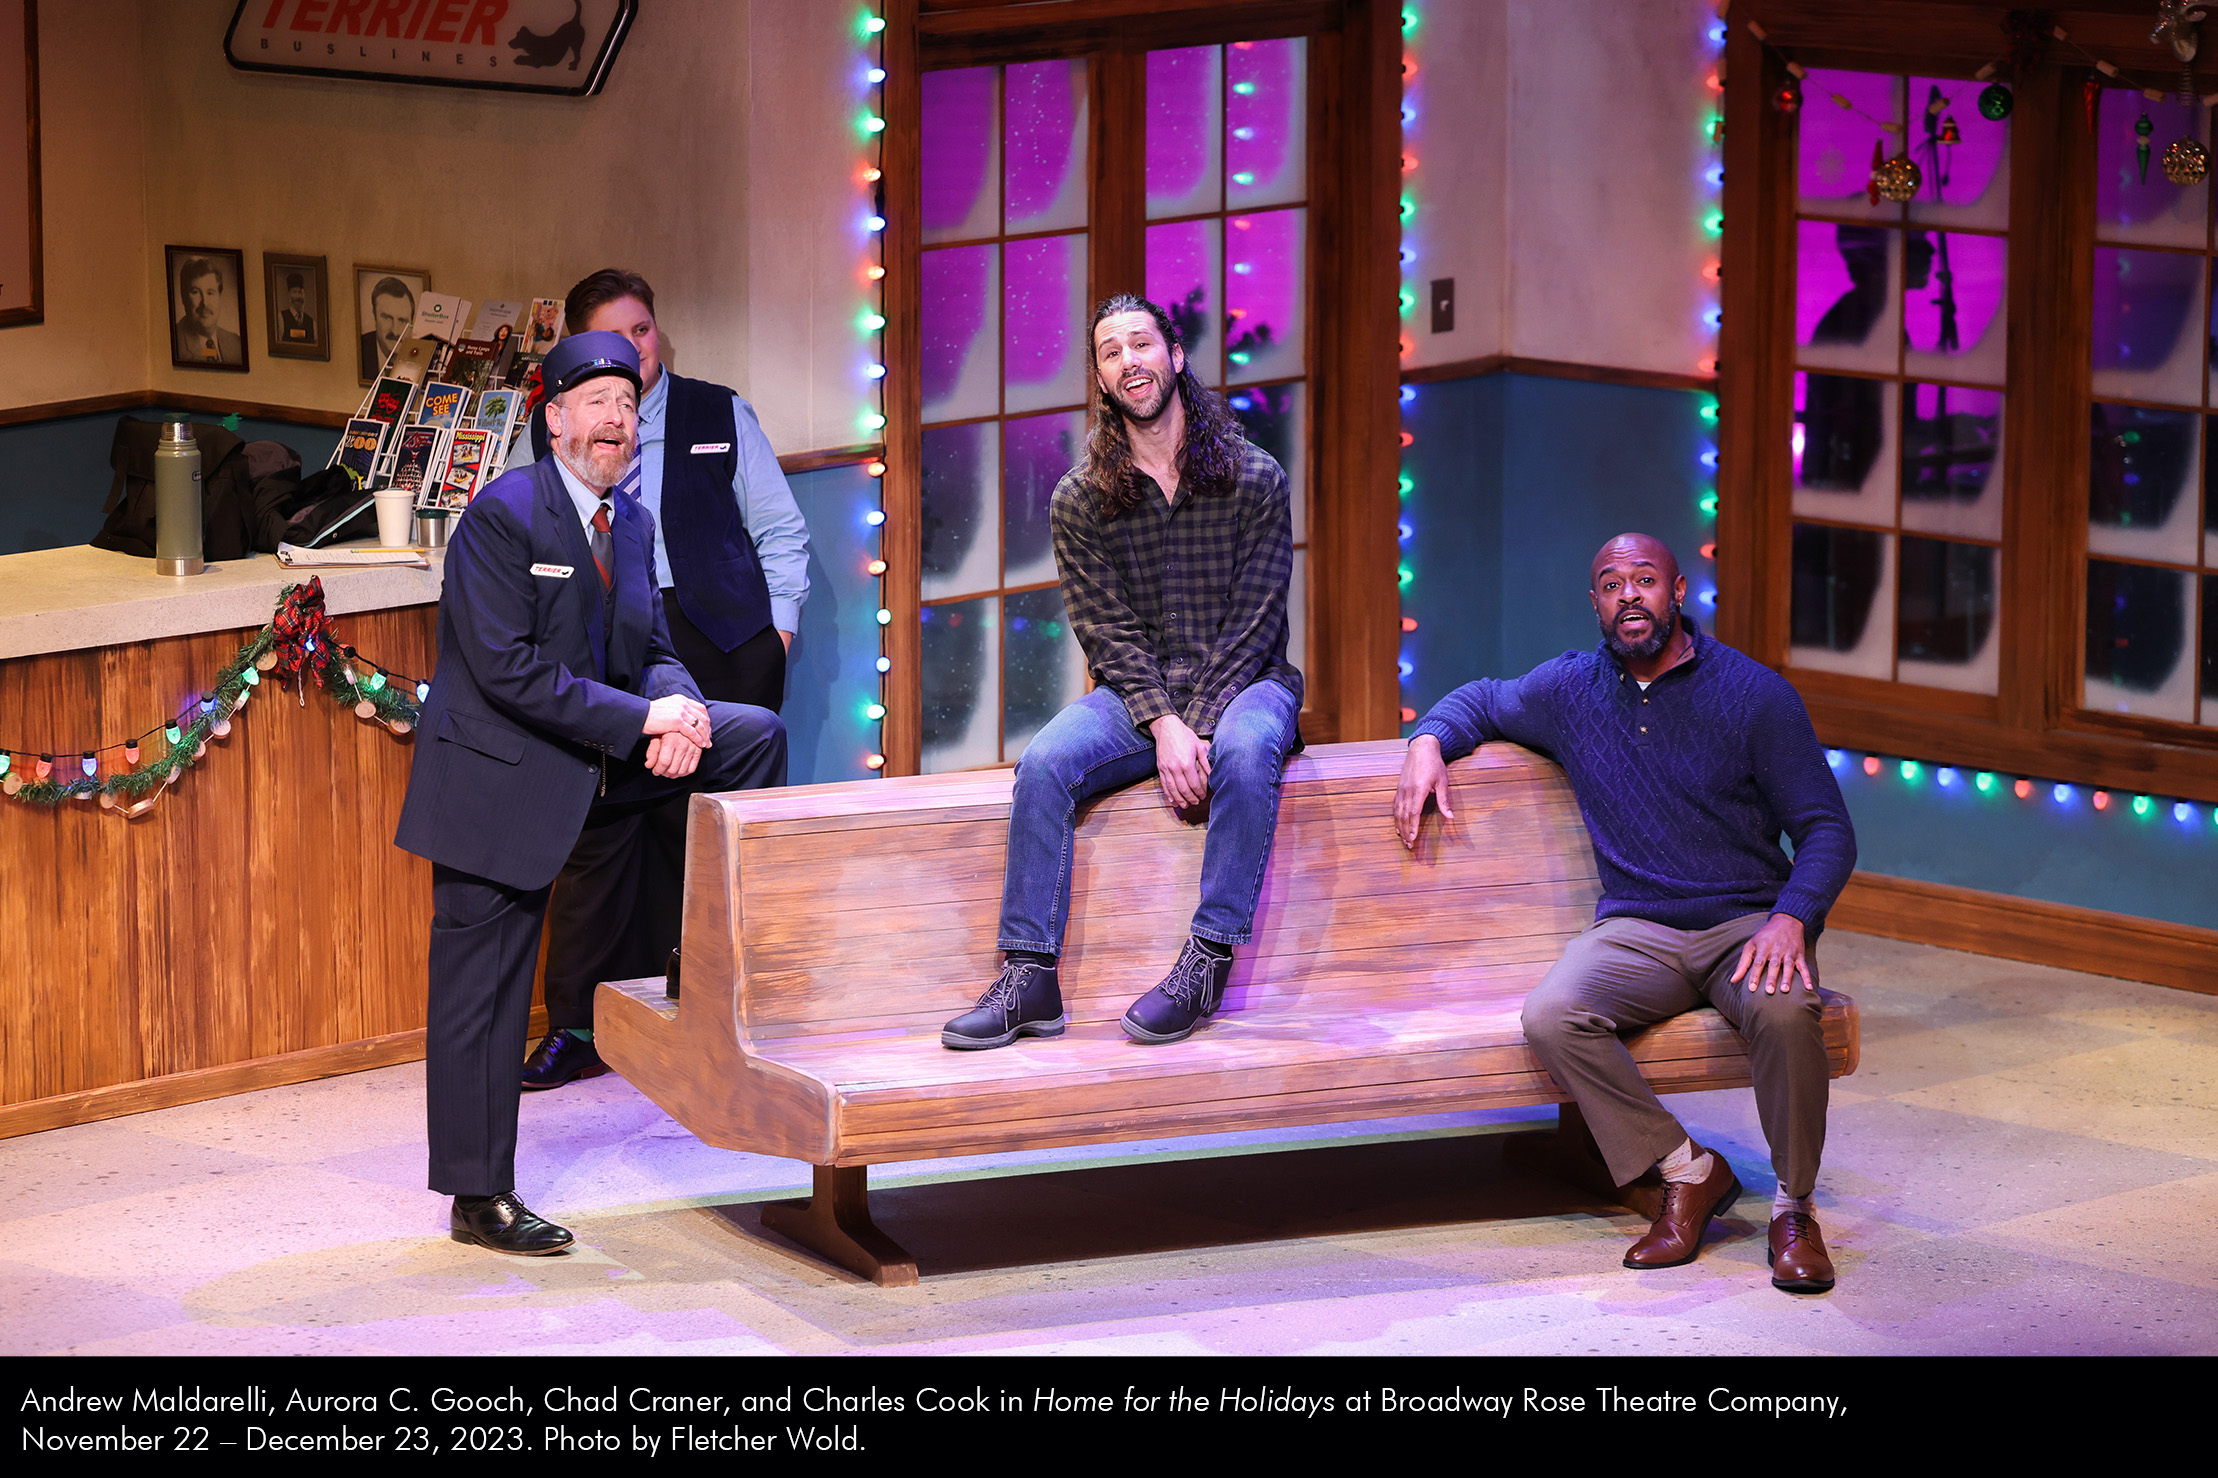 Andrew Maldarelli, Aurora C. Gooch, Chad Craner, and Charles Cook in Home for the Holidays at Broadway Rose Theatre Company, November 22 – December 23, 2023. Photo by Fletcher Wold.